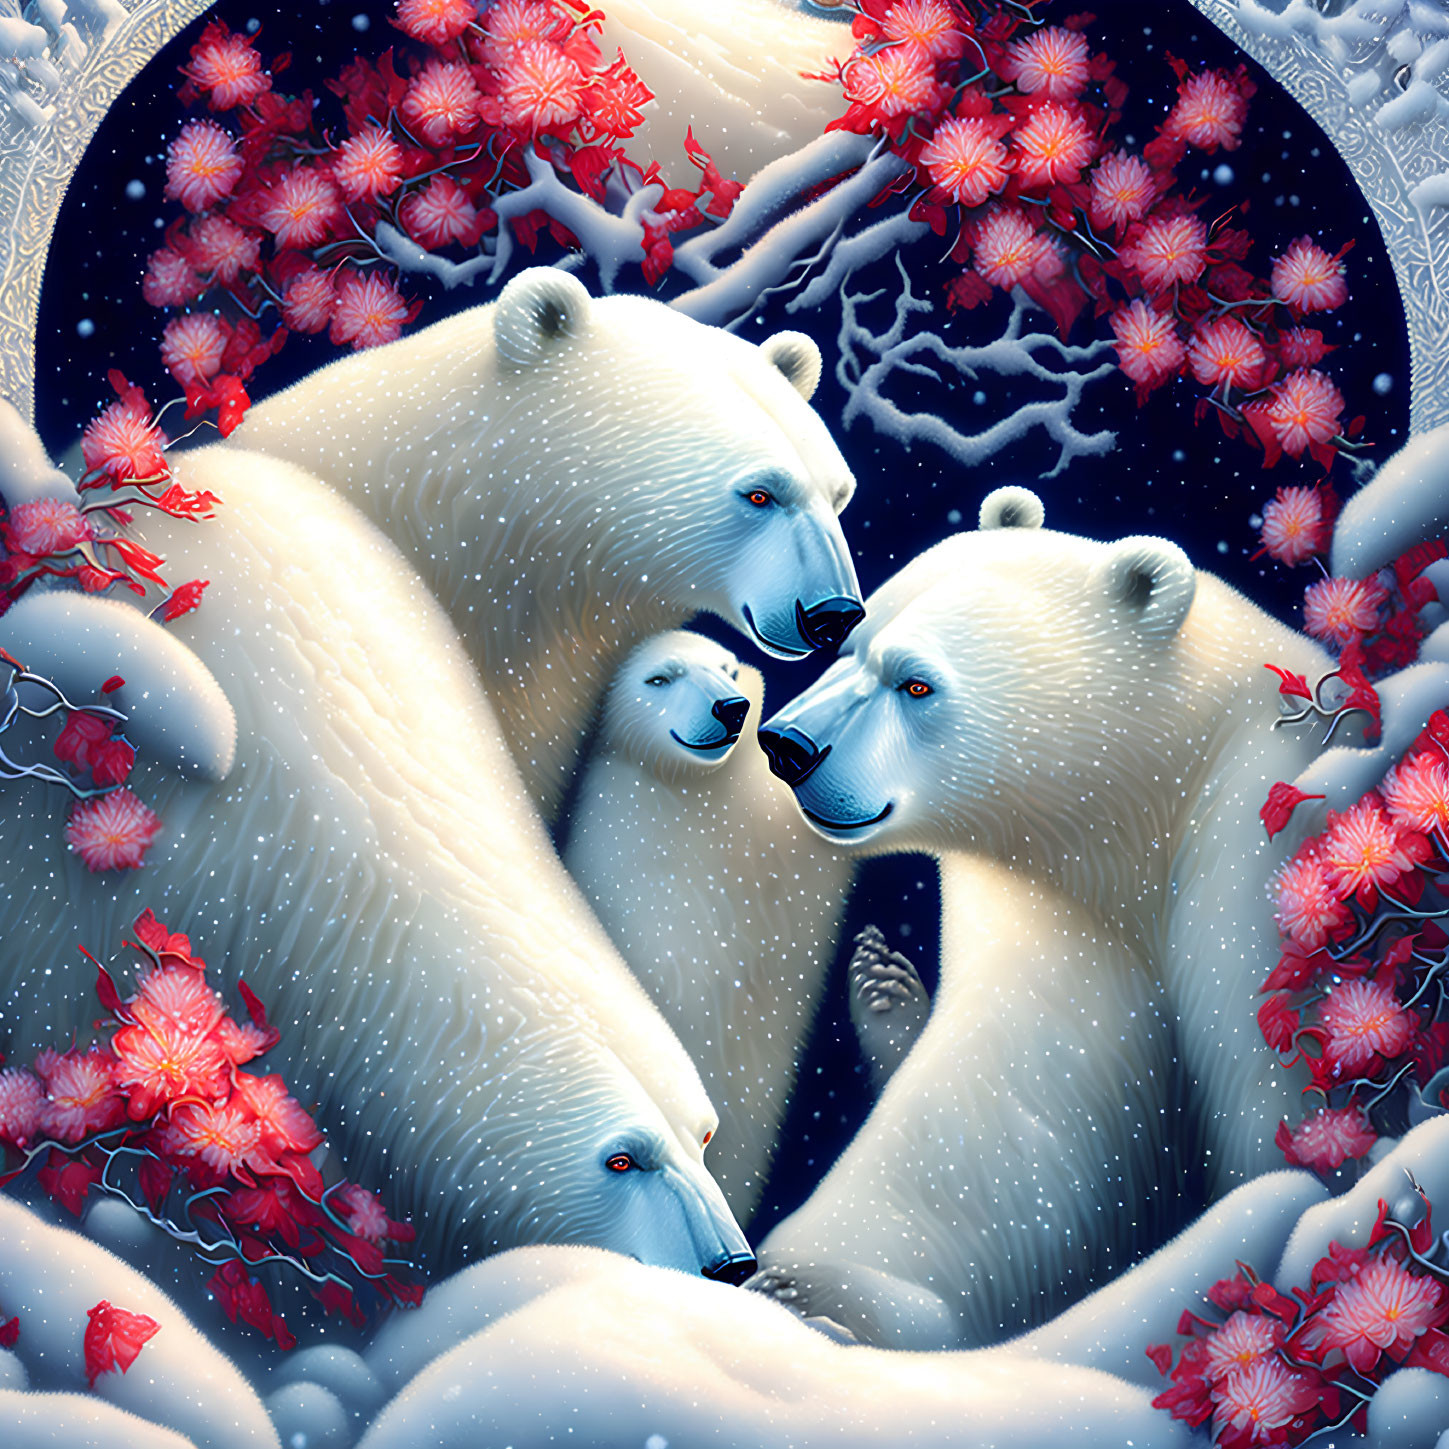 Polar bear family in snow with red flowers under moonlit sky